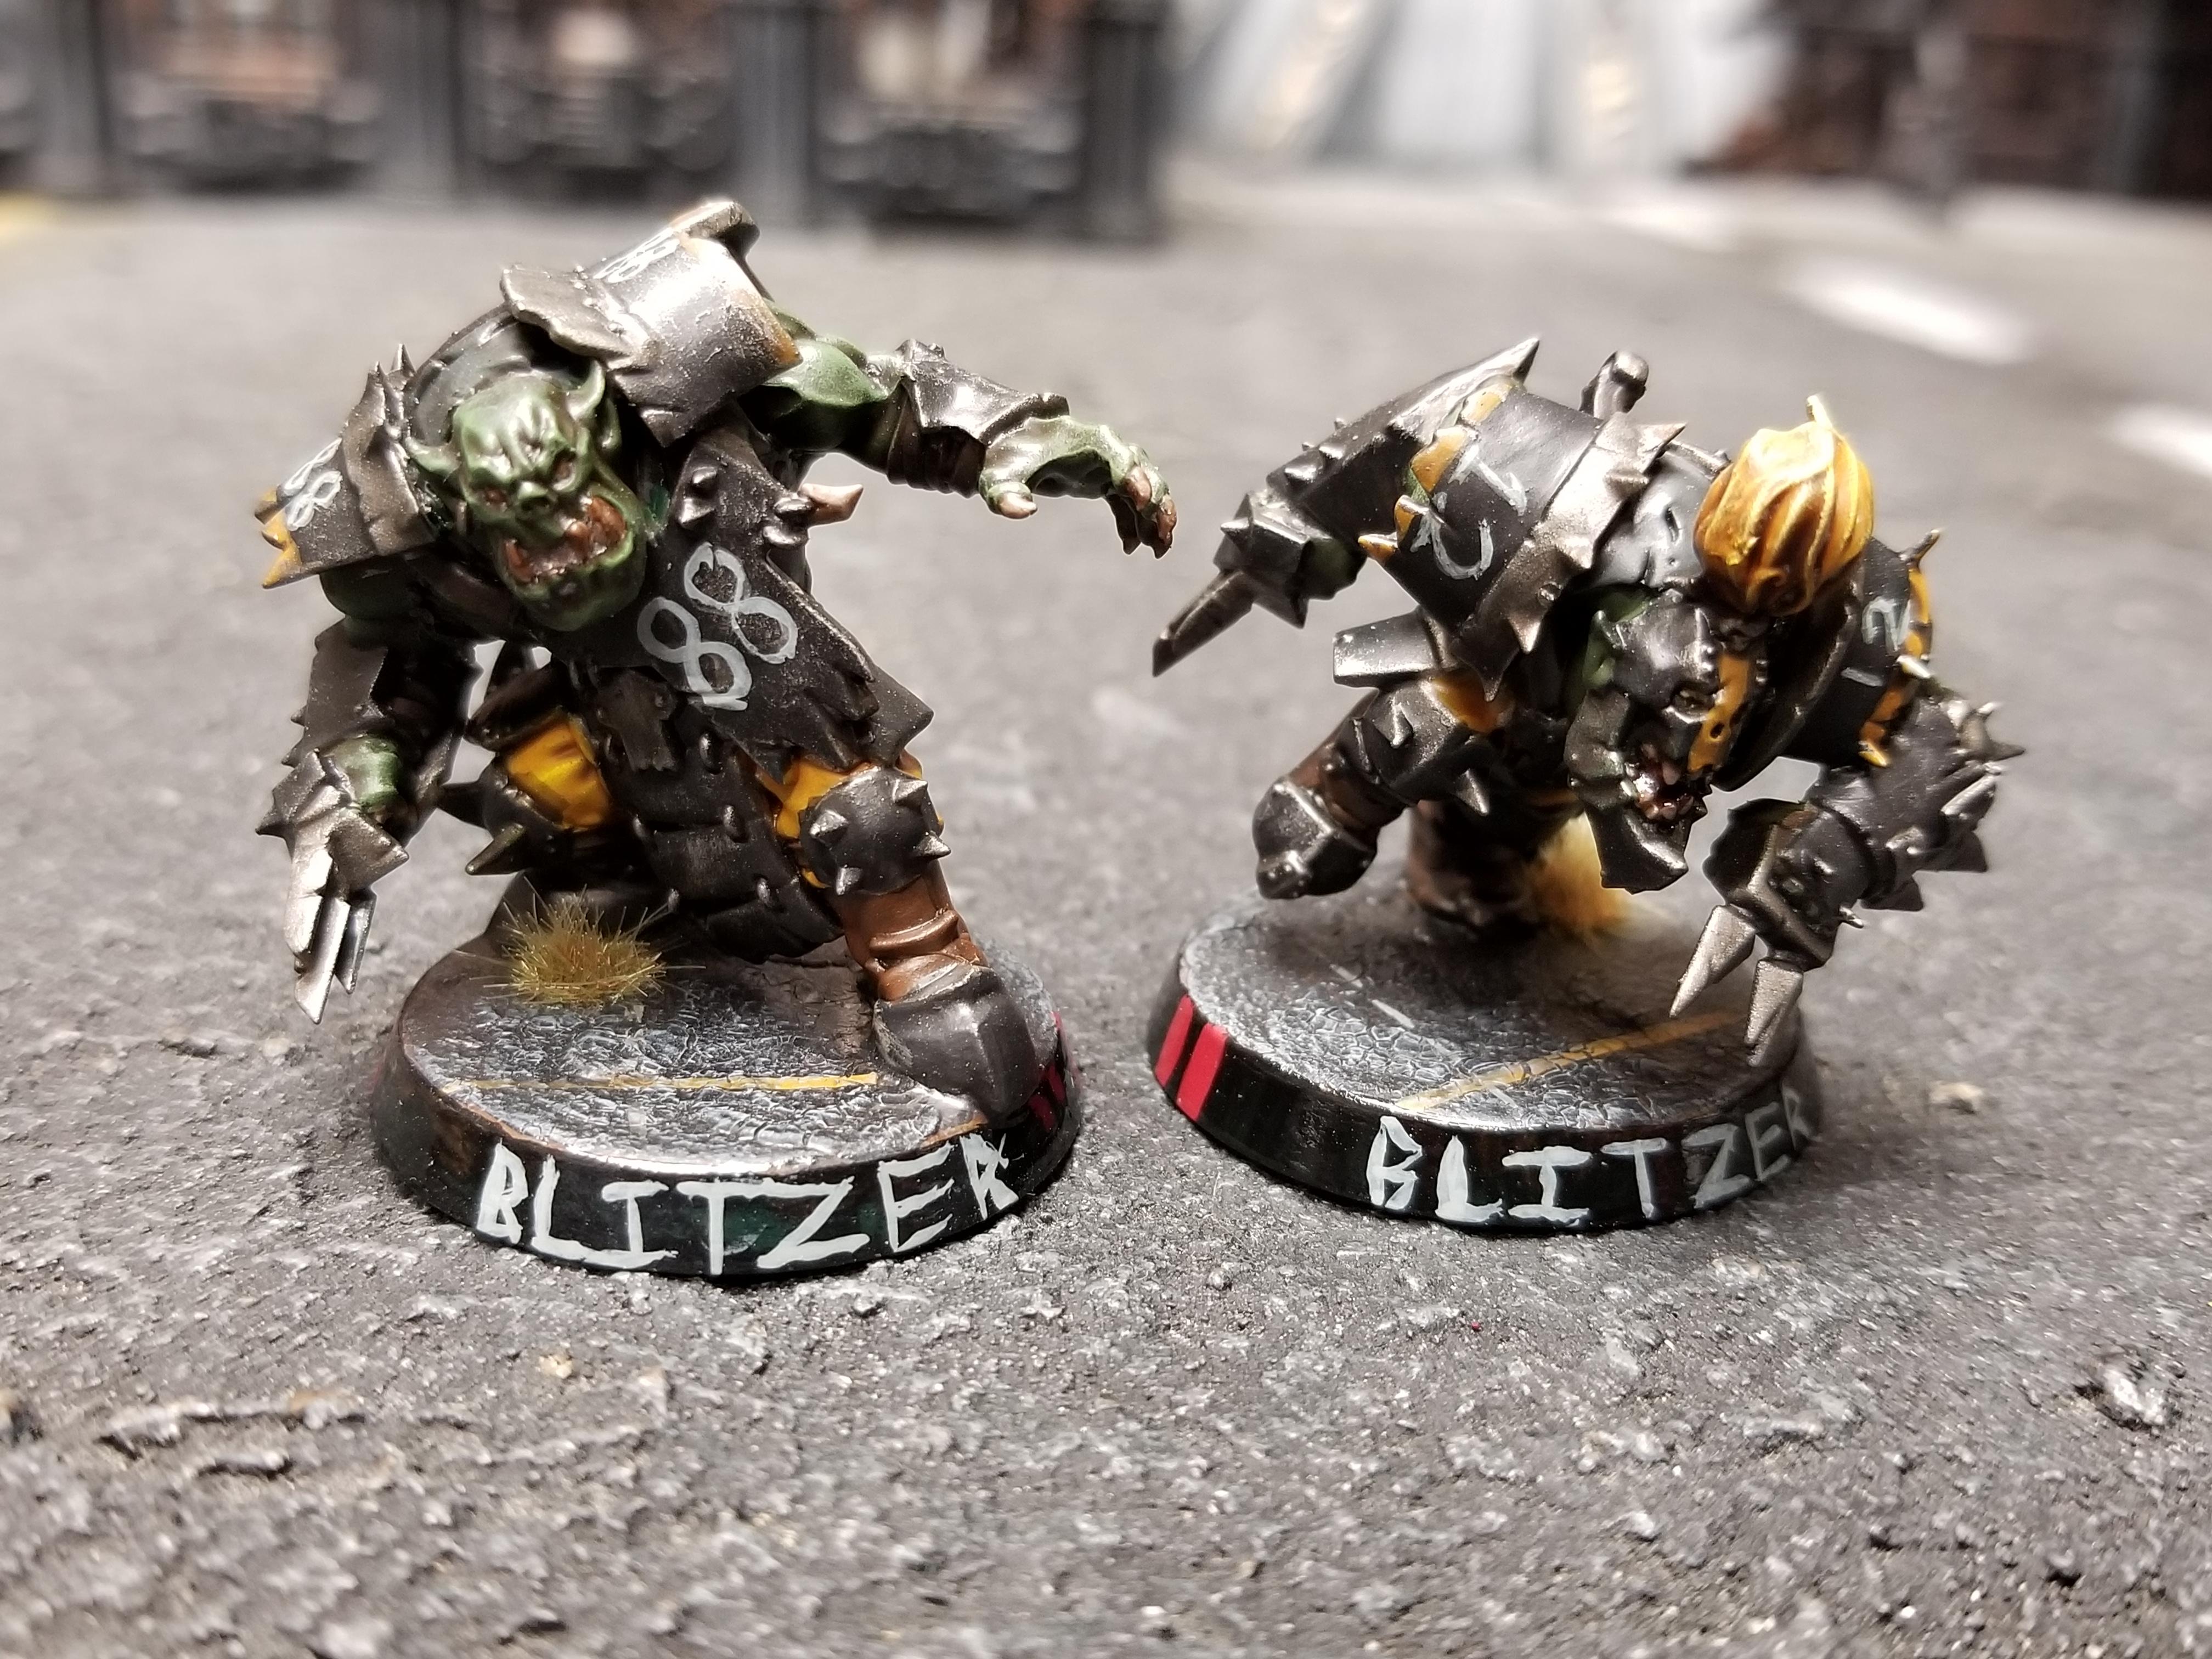 Blitzers, Blood Bowl, Conversion, Go Steelers, Goblins, Gouged Eyes, Kitbash, Orcs, Orks, Pittsburgh